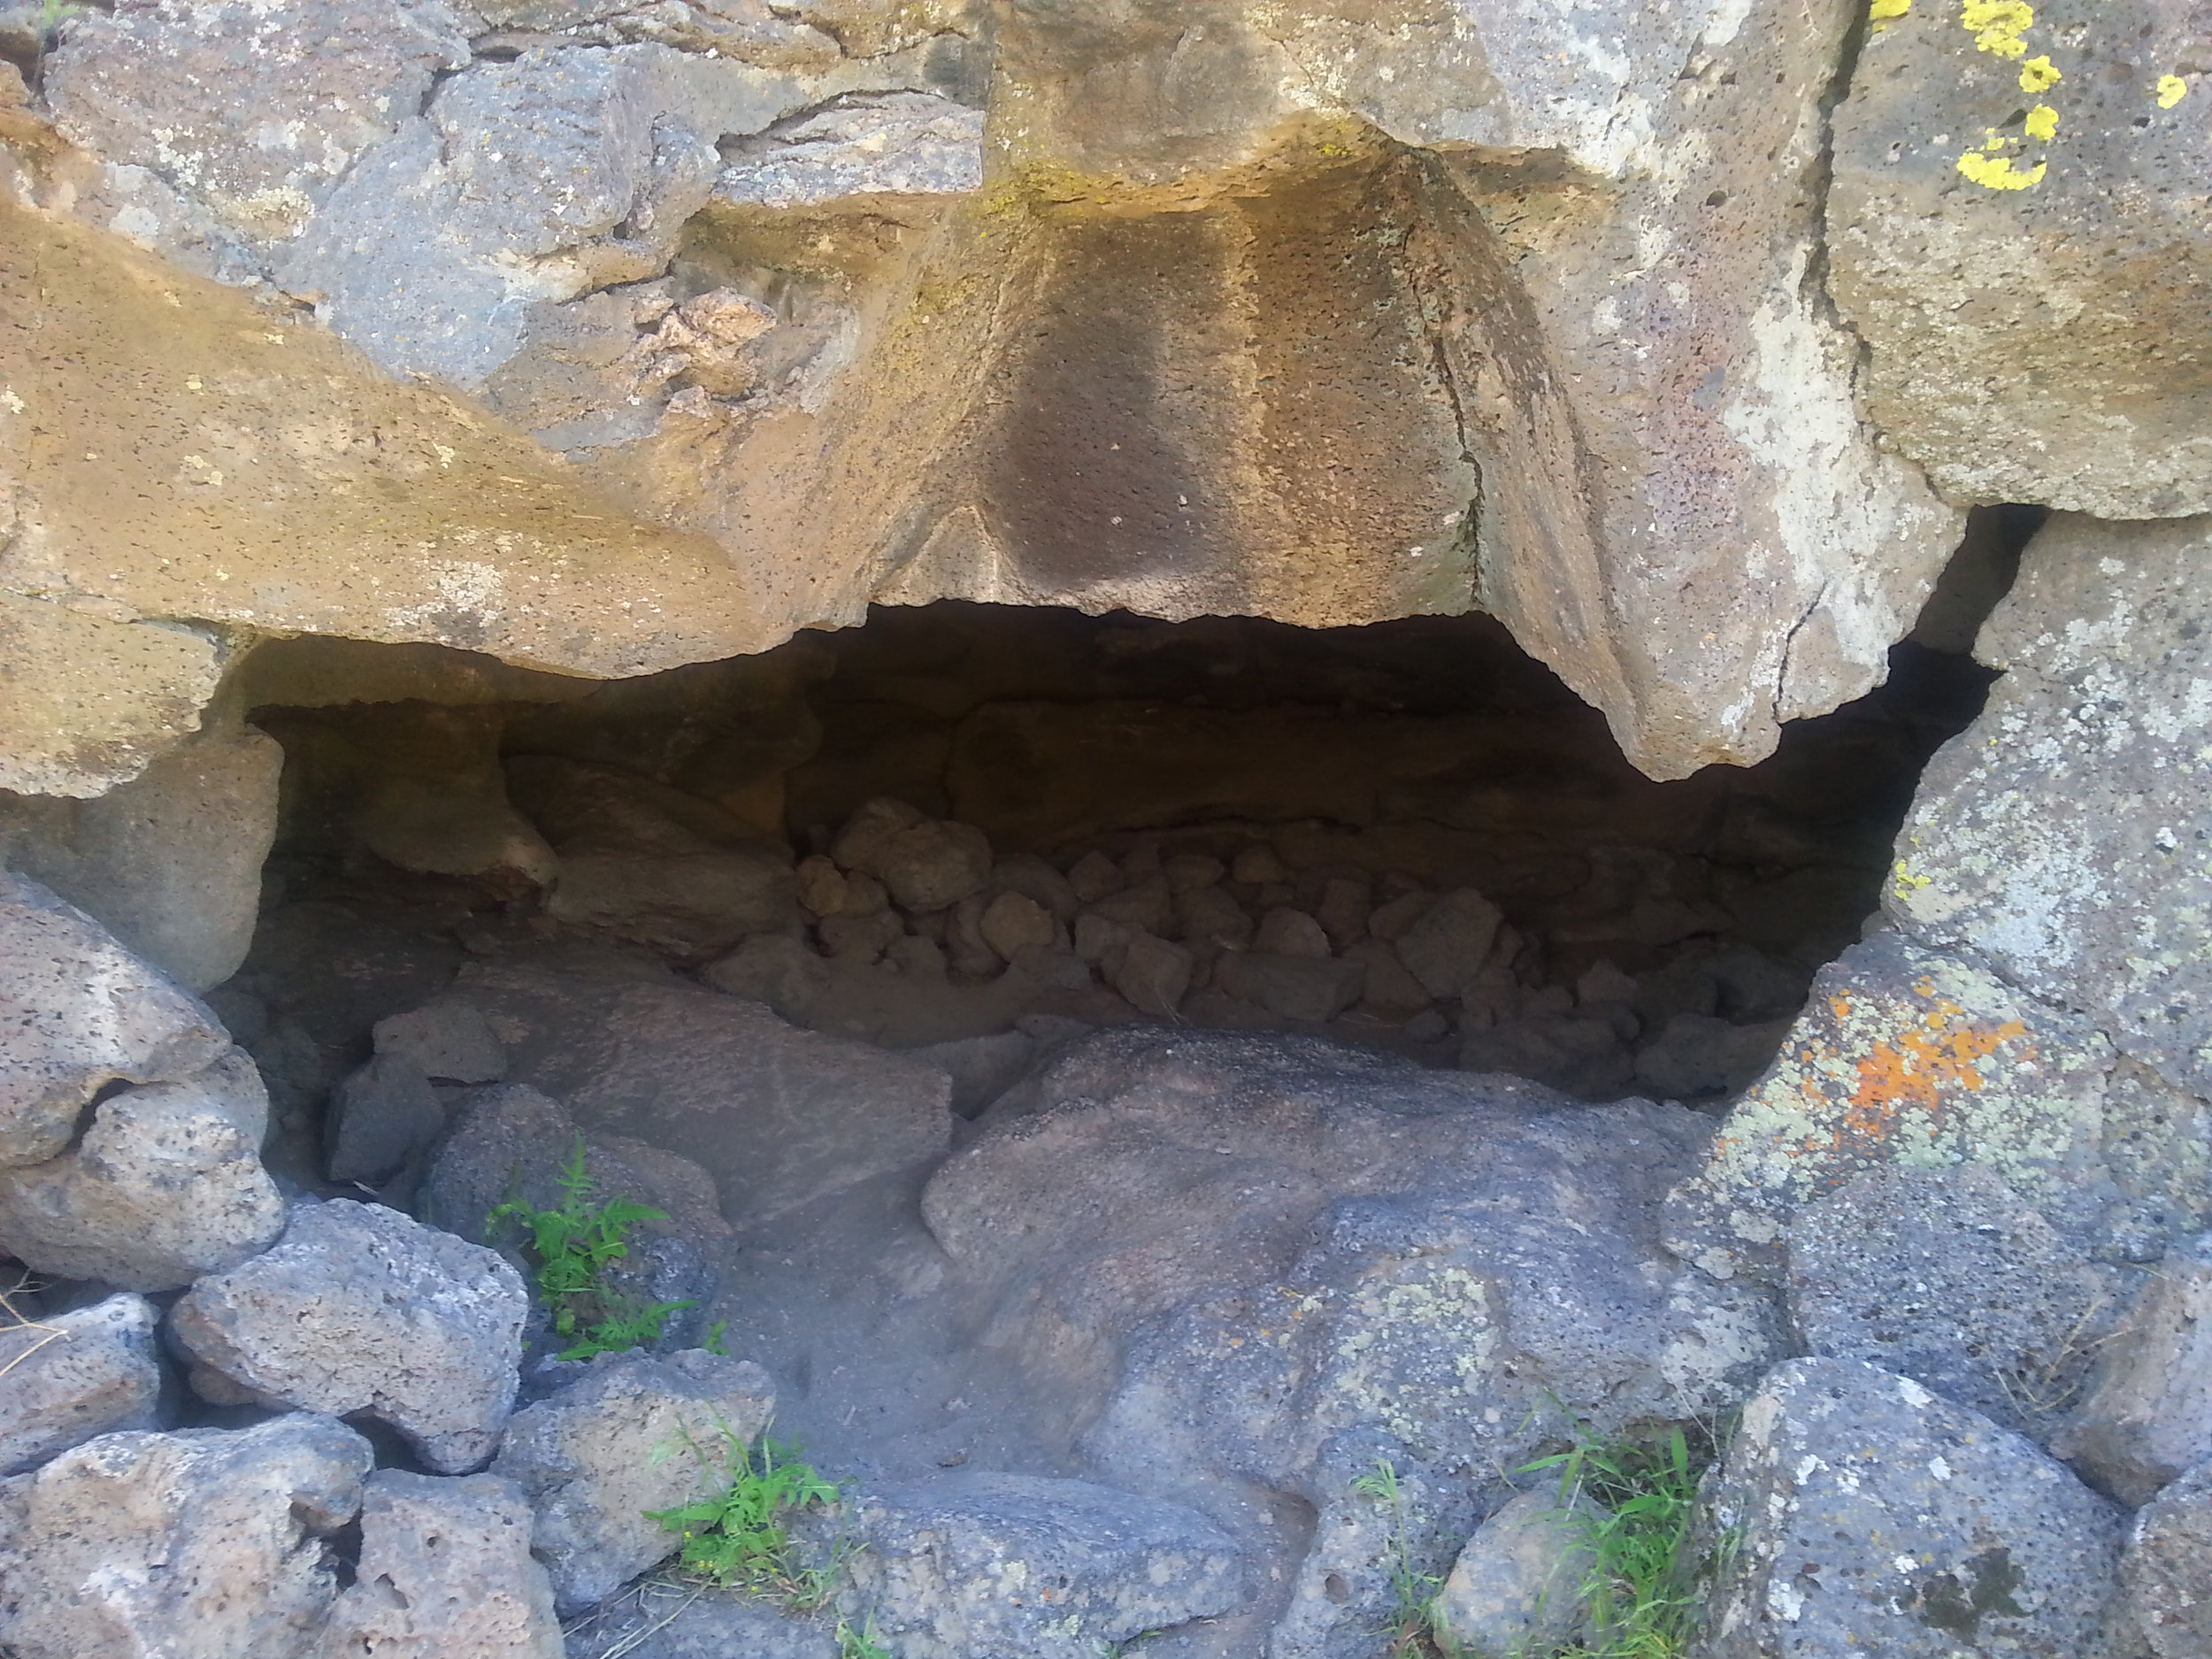 LAVA BEDS NATIONAL MONUMENT - What to do in Southern Oregon- Things to do - Hiking - Caves - Kids